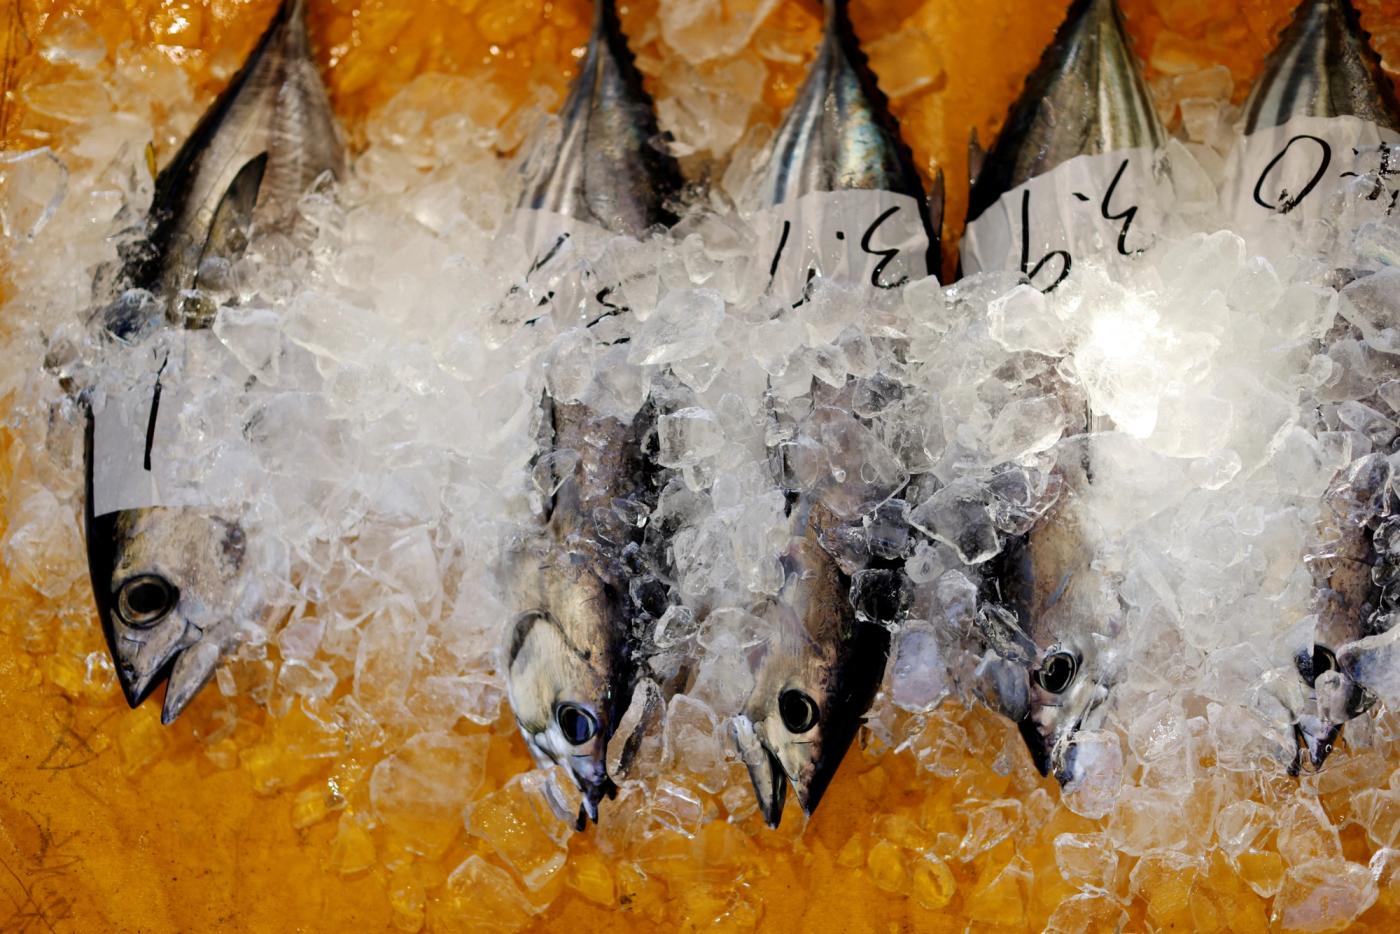 Katsuo (skipjack tuna) are kept in ice during a wholesale auction at Kure Port, in Nakatosa Town, Kochi Prefecture, Japan, May 14, 2022. REUTERS/Kim Kyung-Hoon/File Photo